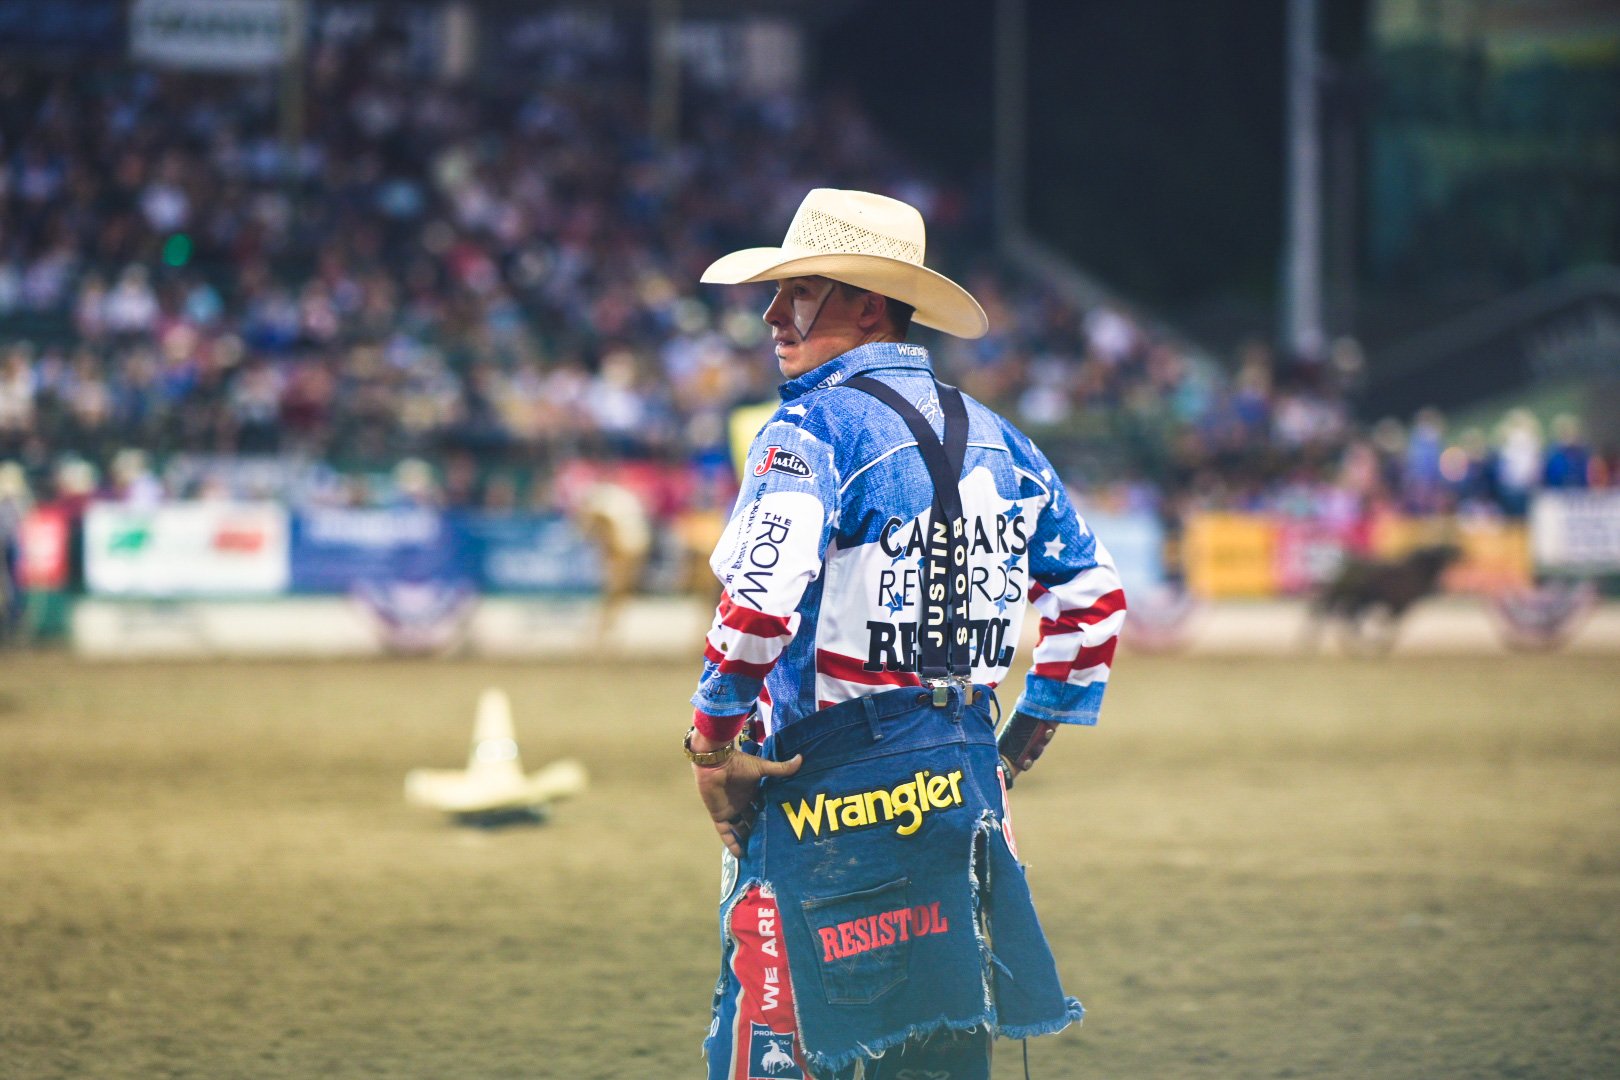 Cody Webster stomped by bull at Cheyenne Frontier Days!  #codywebsterbullfighting 